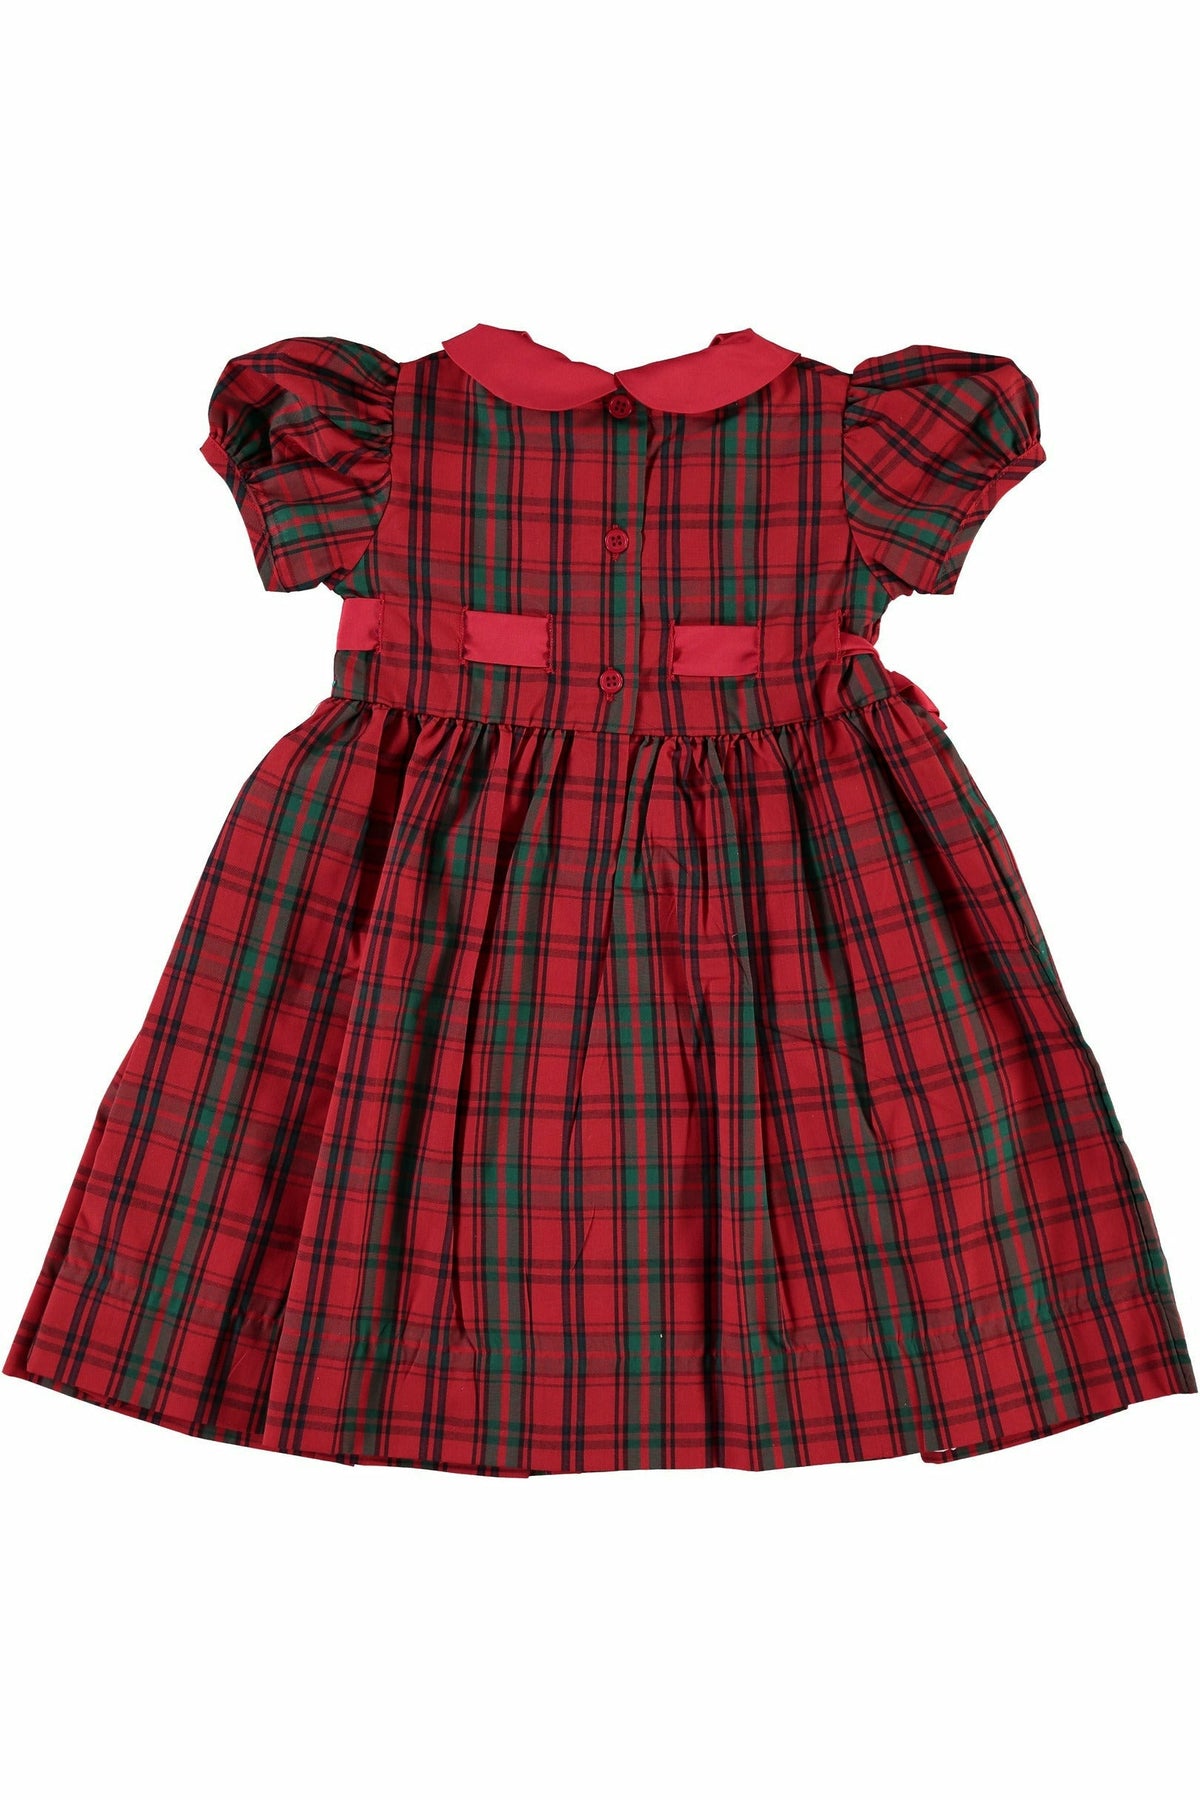 Red Plaid Short Sleeve Dress: Baby & Toddler – Carriage Boutique